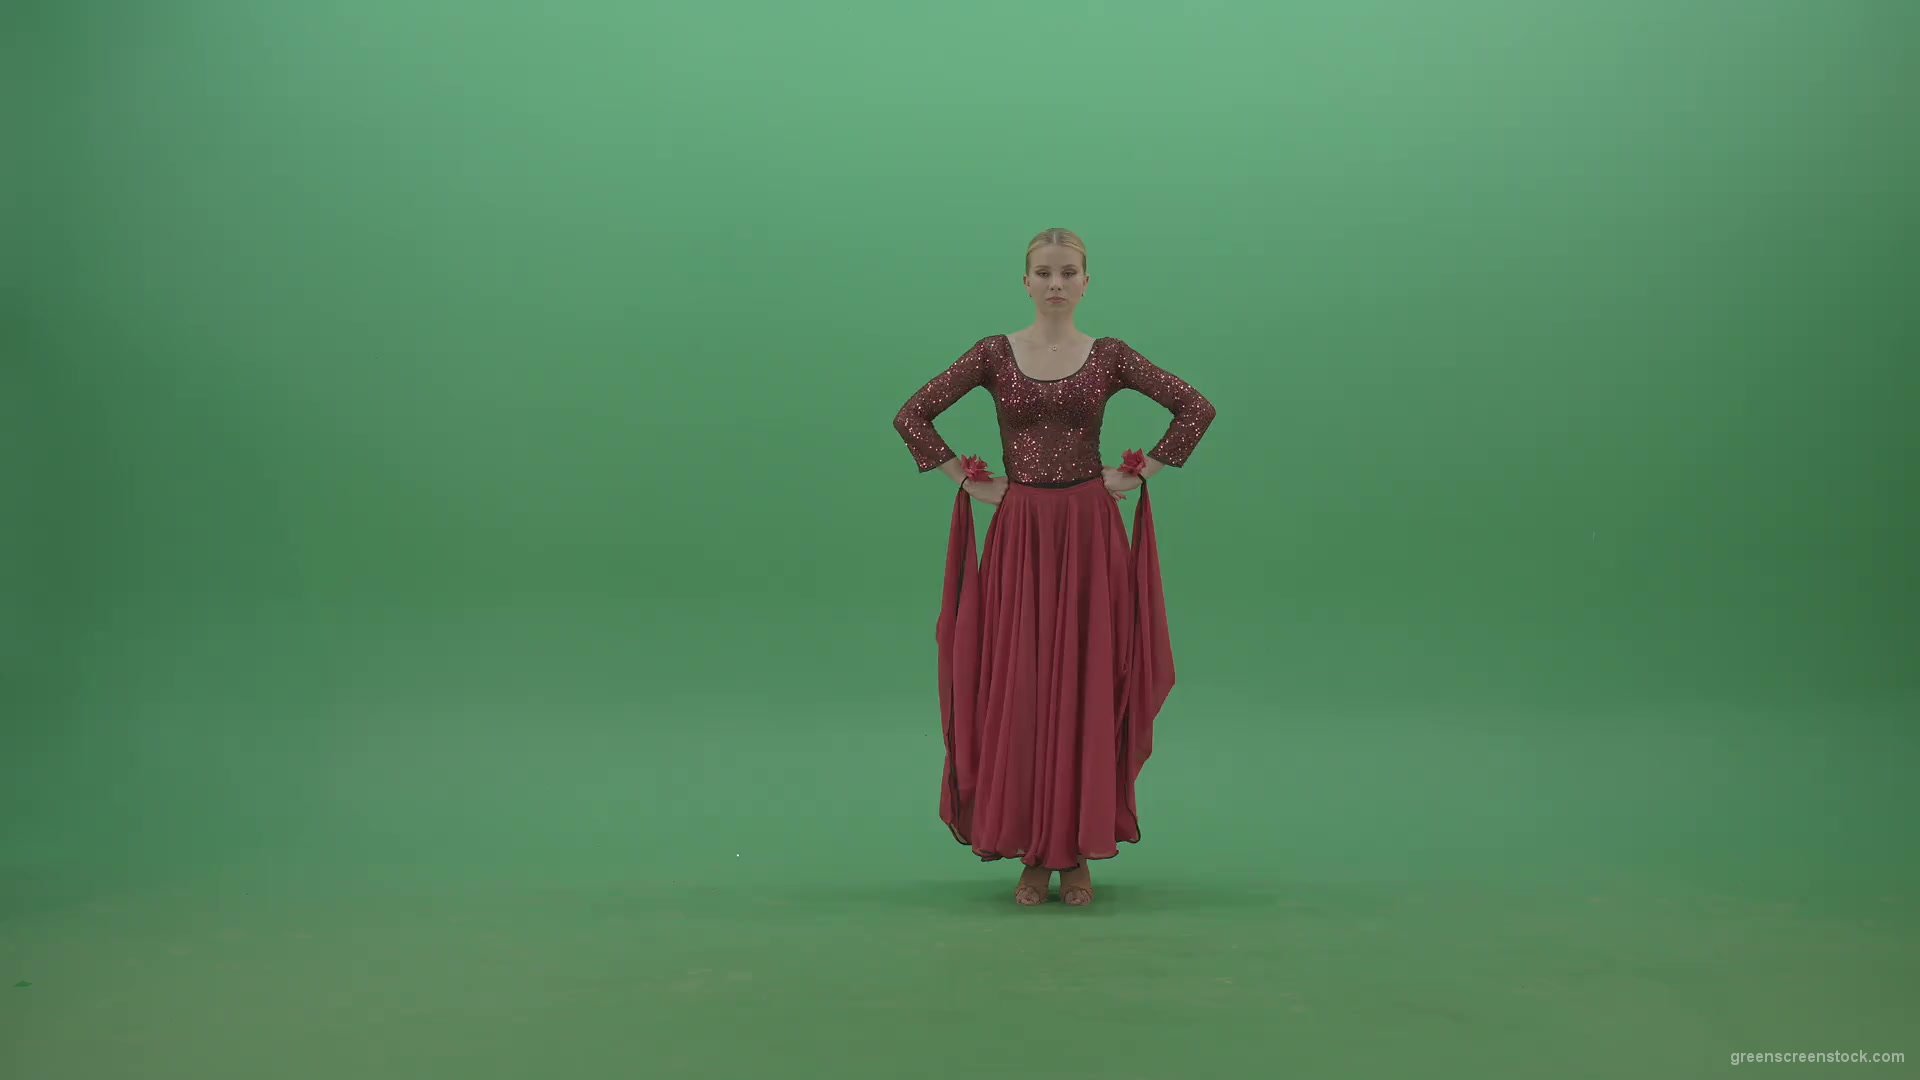 Blondie-in-red-latino-wear-moving-and-dance-on-green-screen-4K-Video-Footage-1920_001 Green Screen Stock